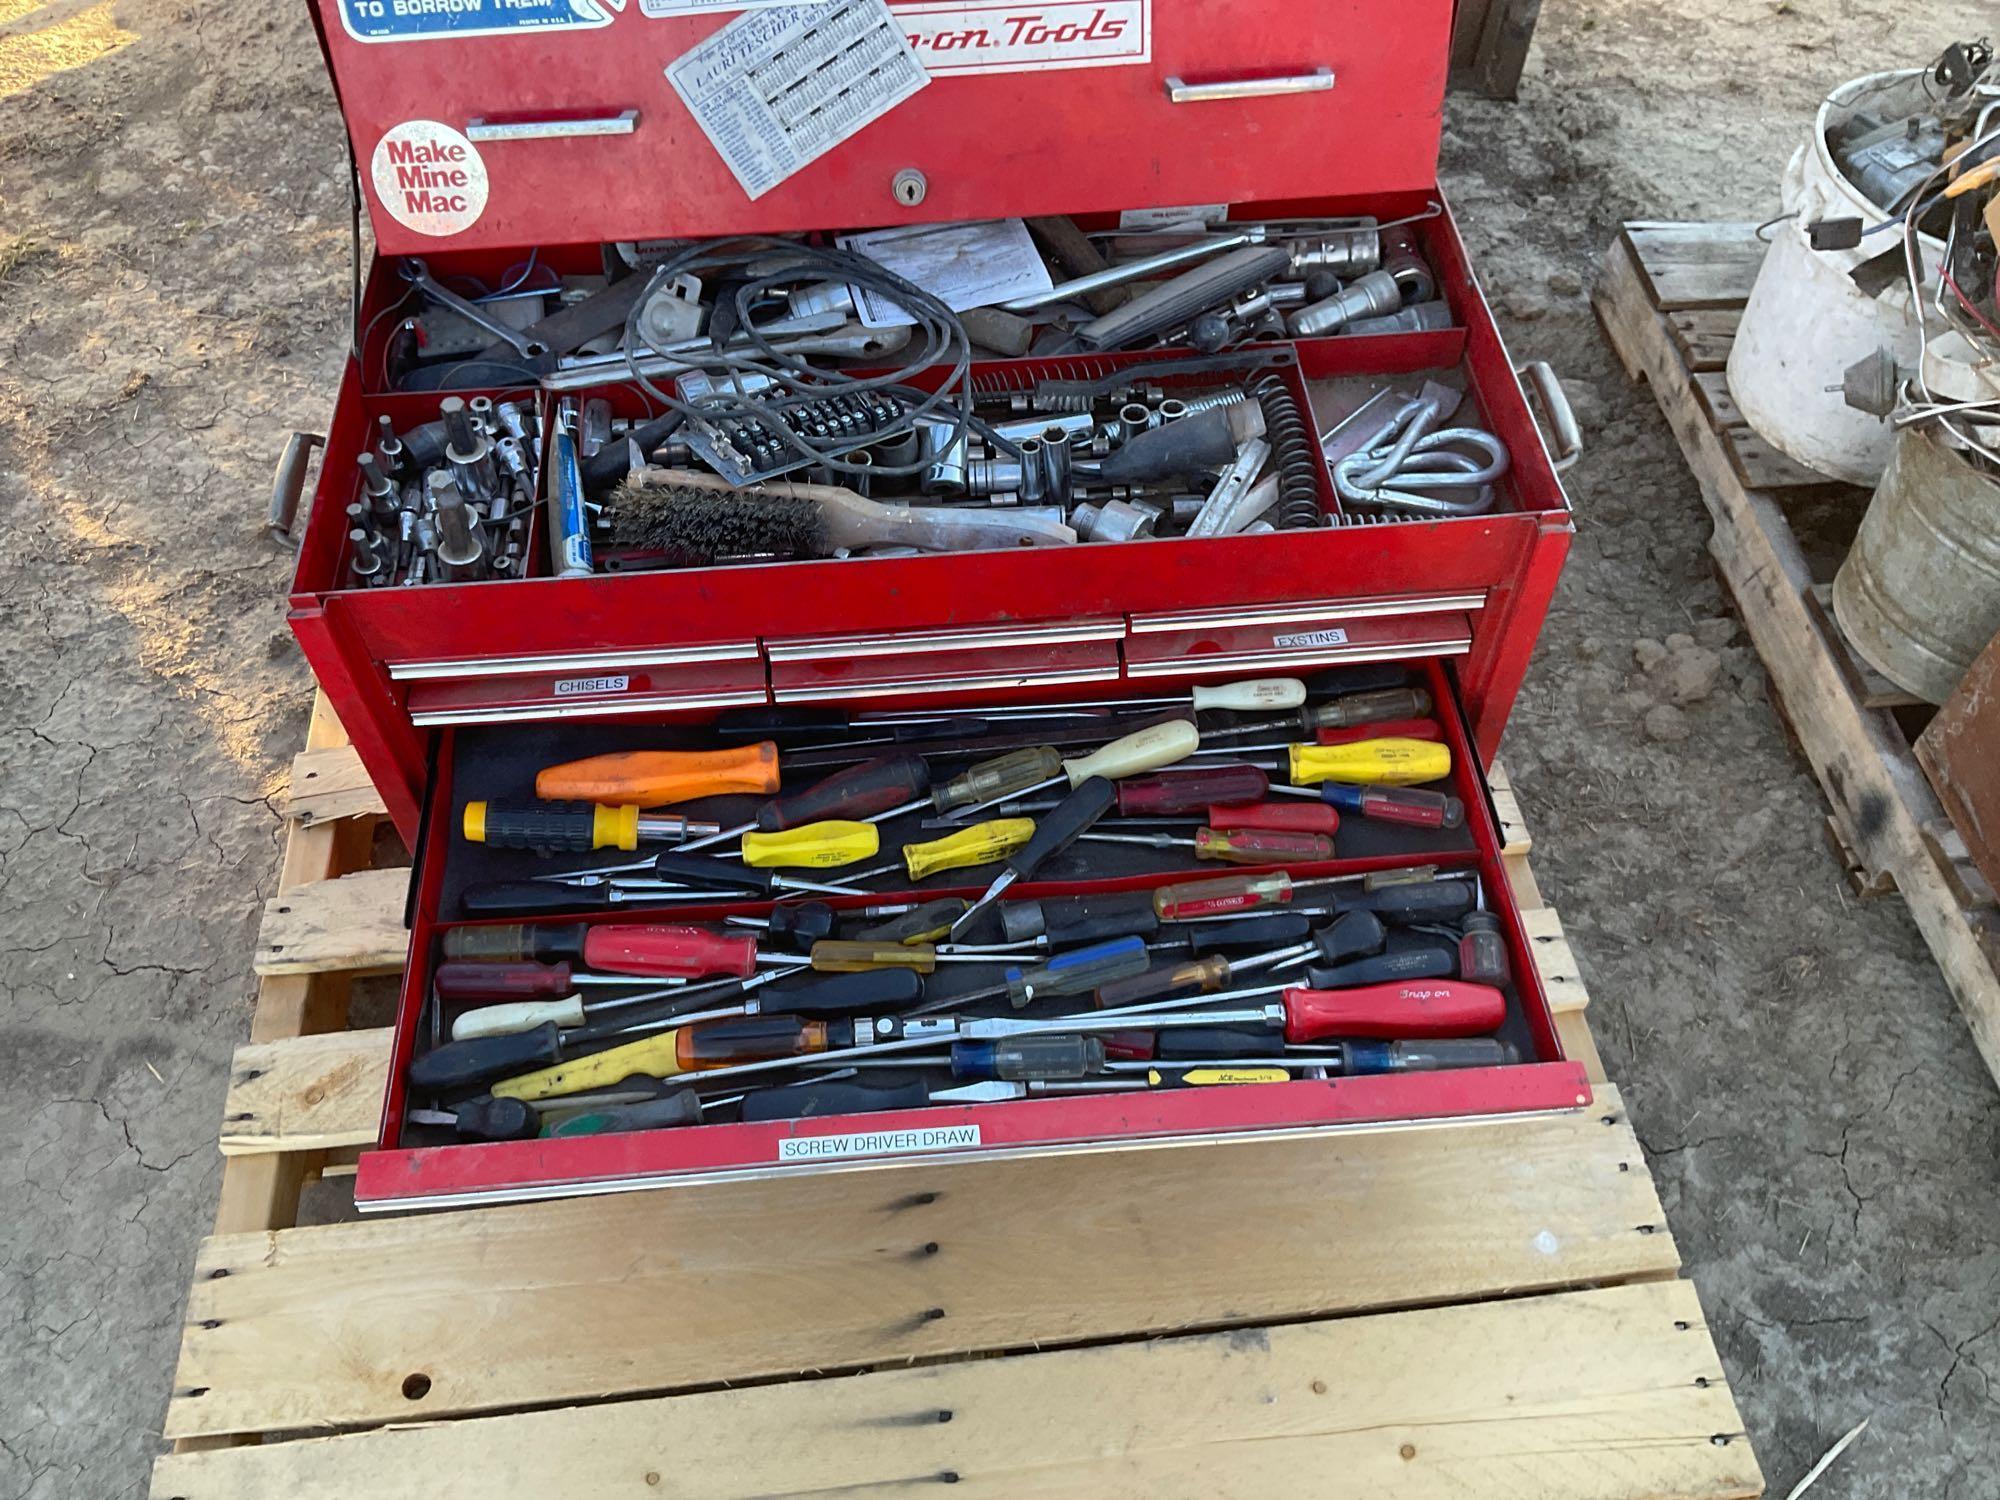 Snap-on tool box and tools